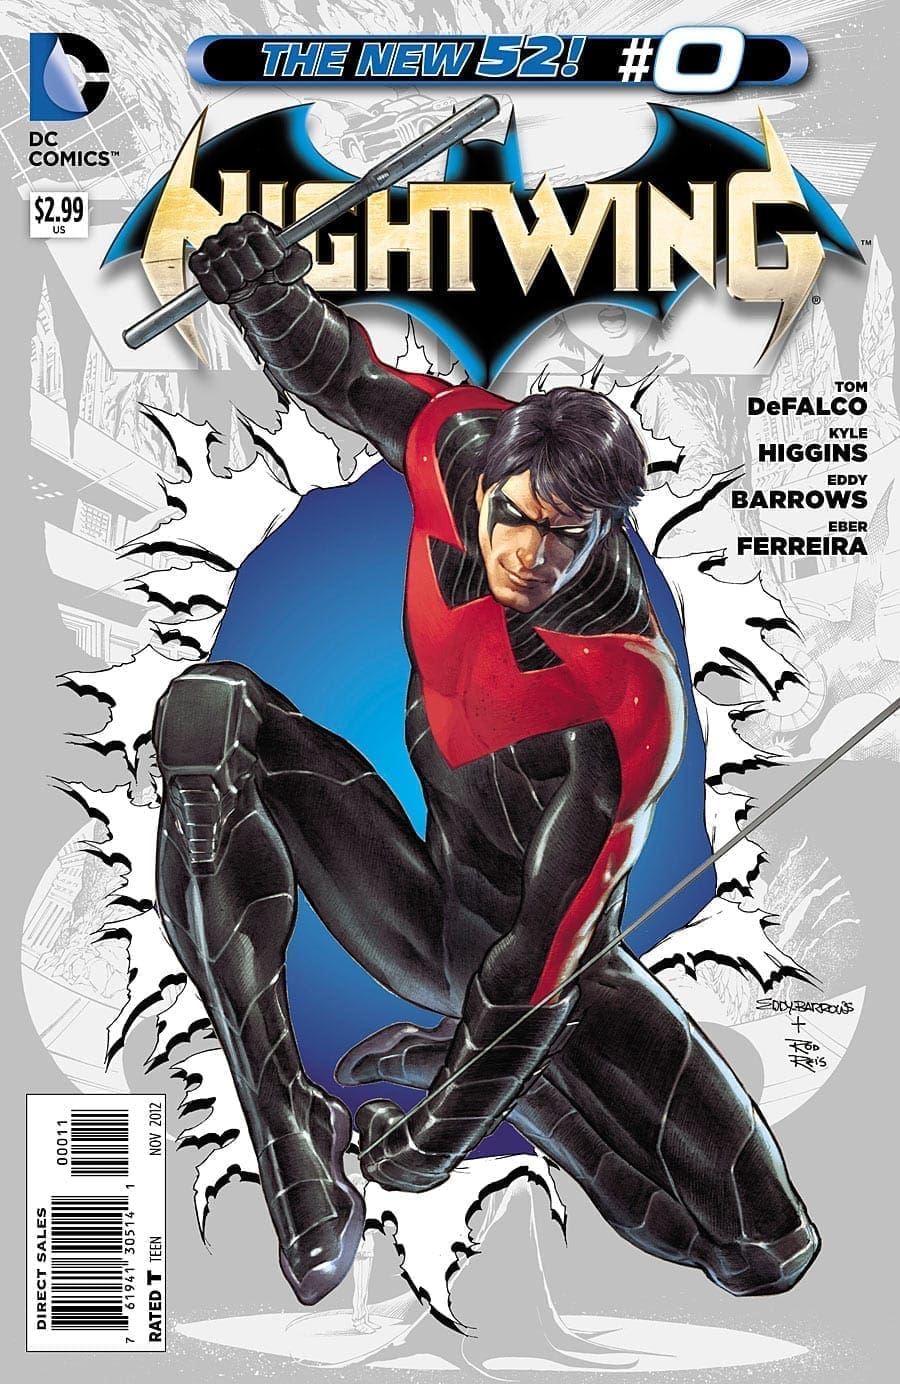 batwoman, daredevil, dc comics, doctor who, Godzilla, justice league, marvel comics, new comic book day, nightwing, Penguin Pain And Prejudice, spider-men, the walking dead, wonder woman